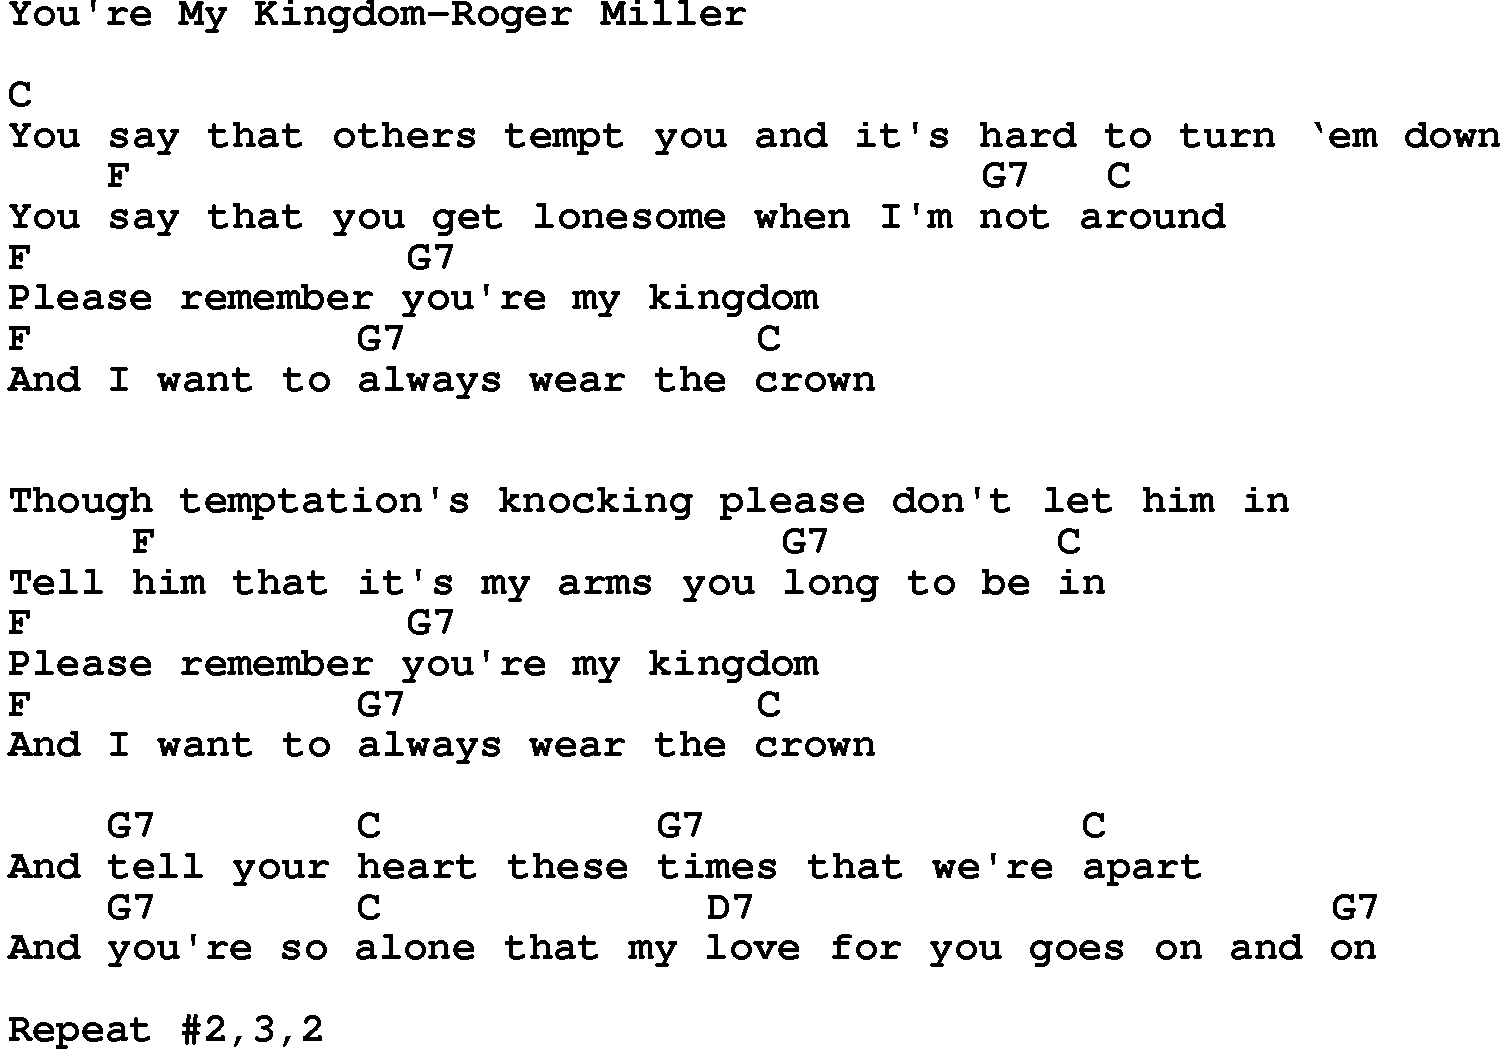 Country music song: You're My Kingdom-Roger Miller lyrics and chords